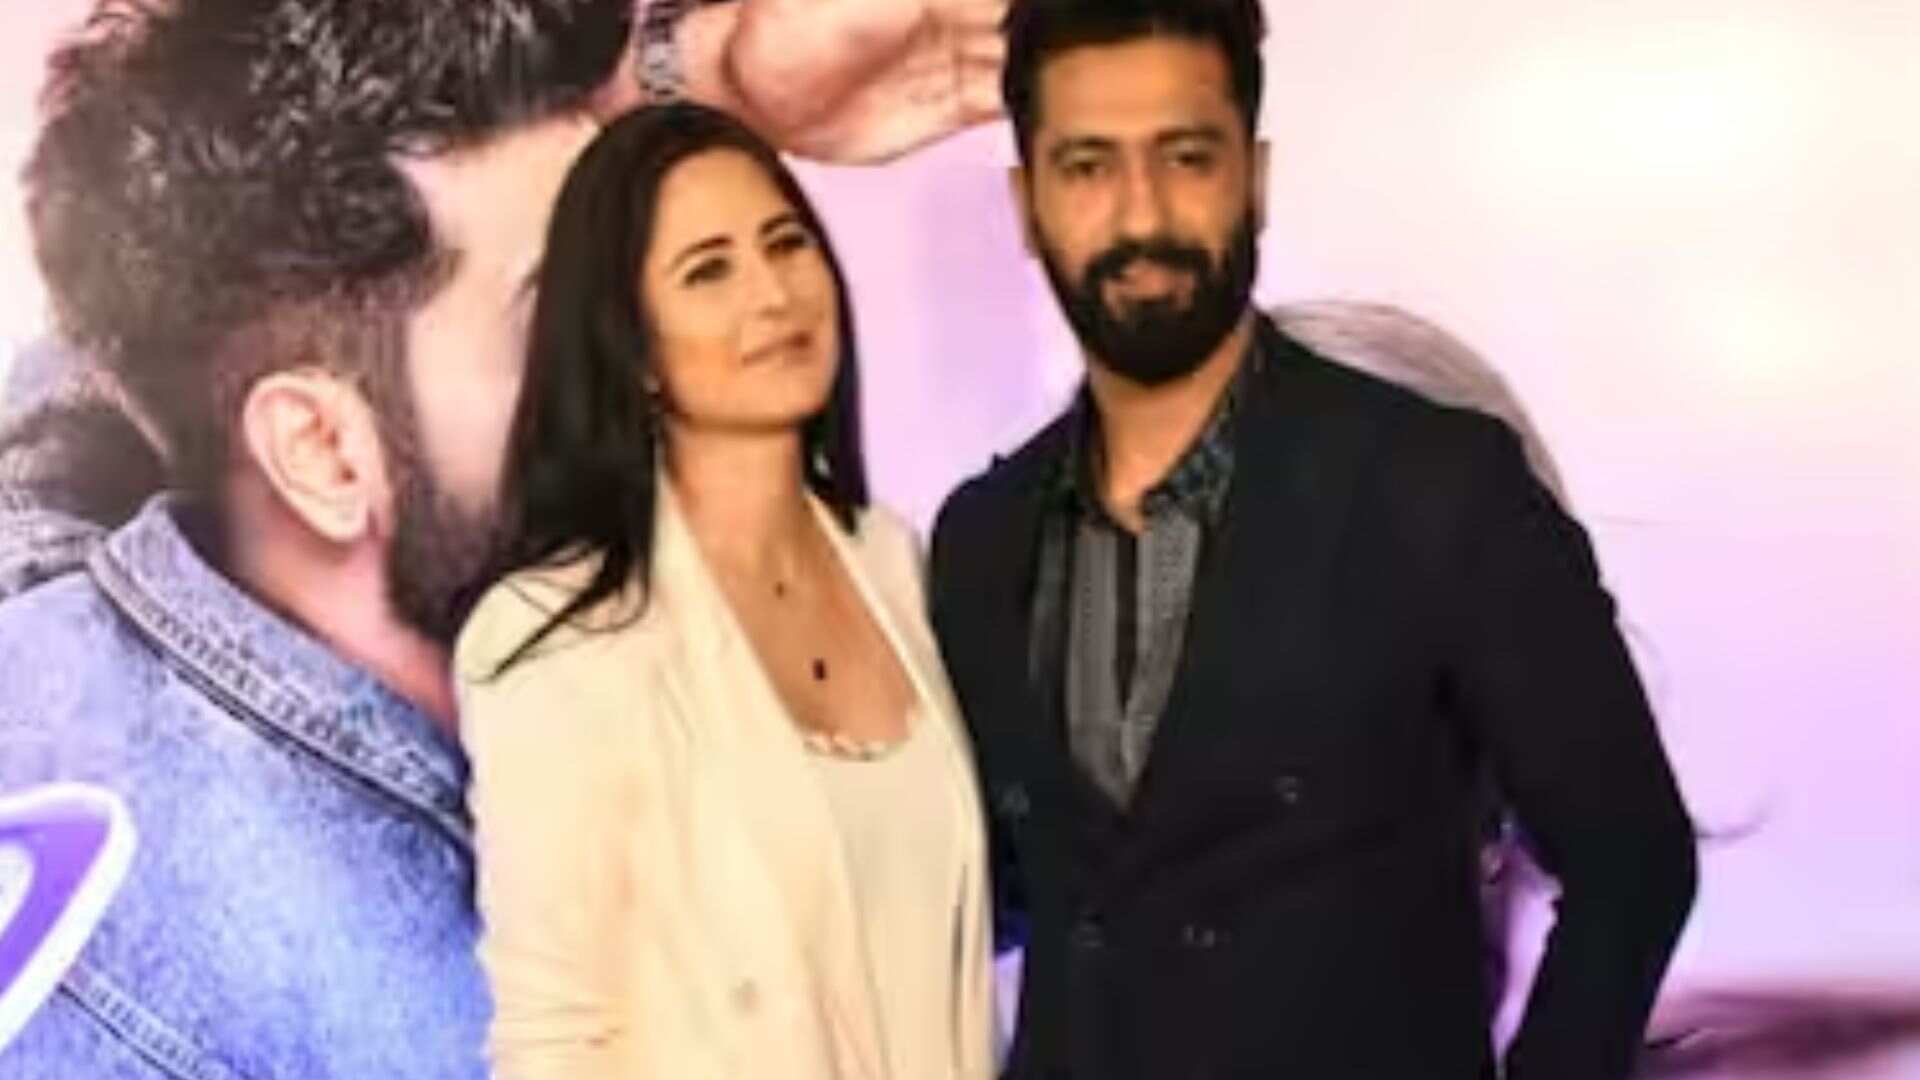 Check Out The Price Of Maxi Dress Worn By Katrina Kaif During Bad Newz Special Screening